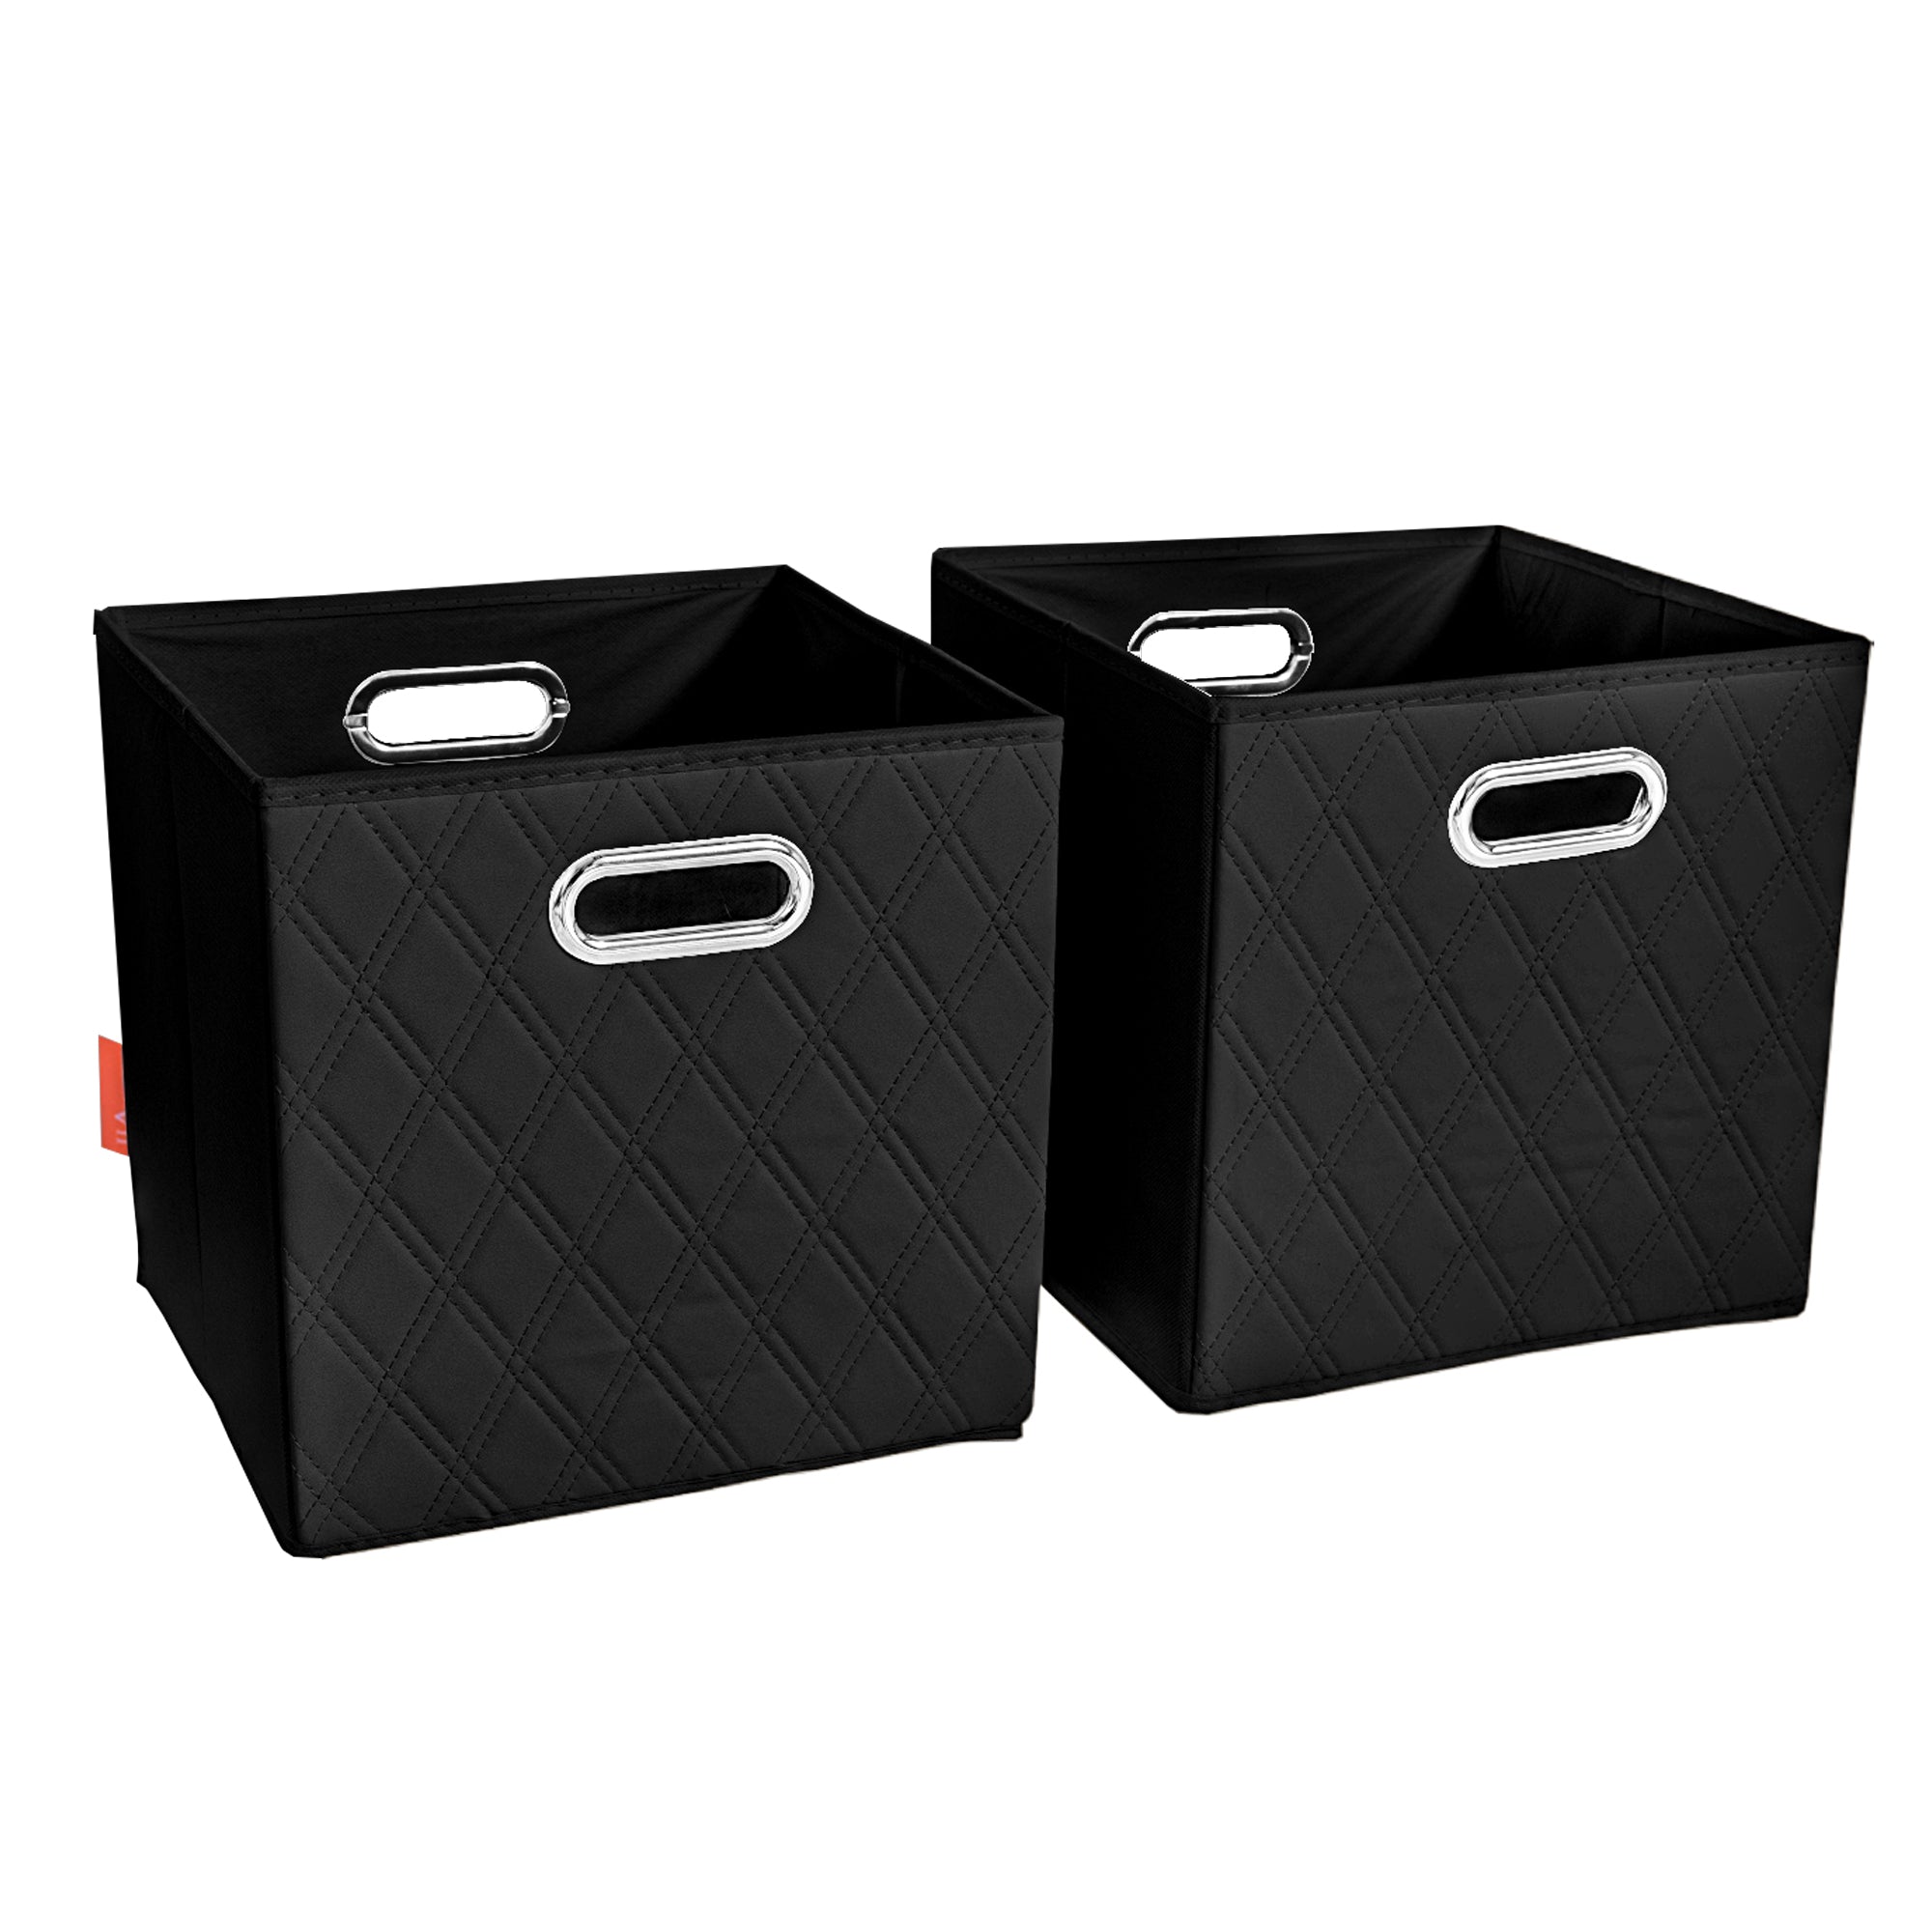 JIAessentials 13 inch Foldable Diamond Patterned Faux Leather Storage Cube Bins Set of Two with Dual Handles - 13" Black